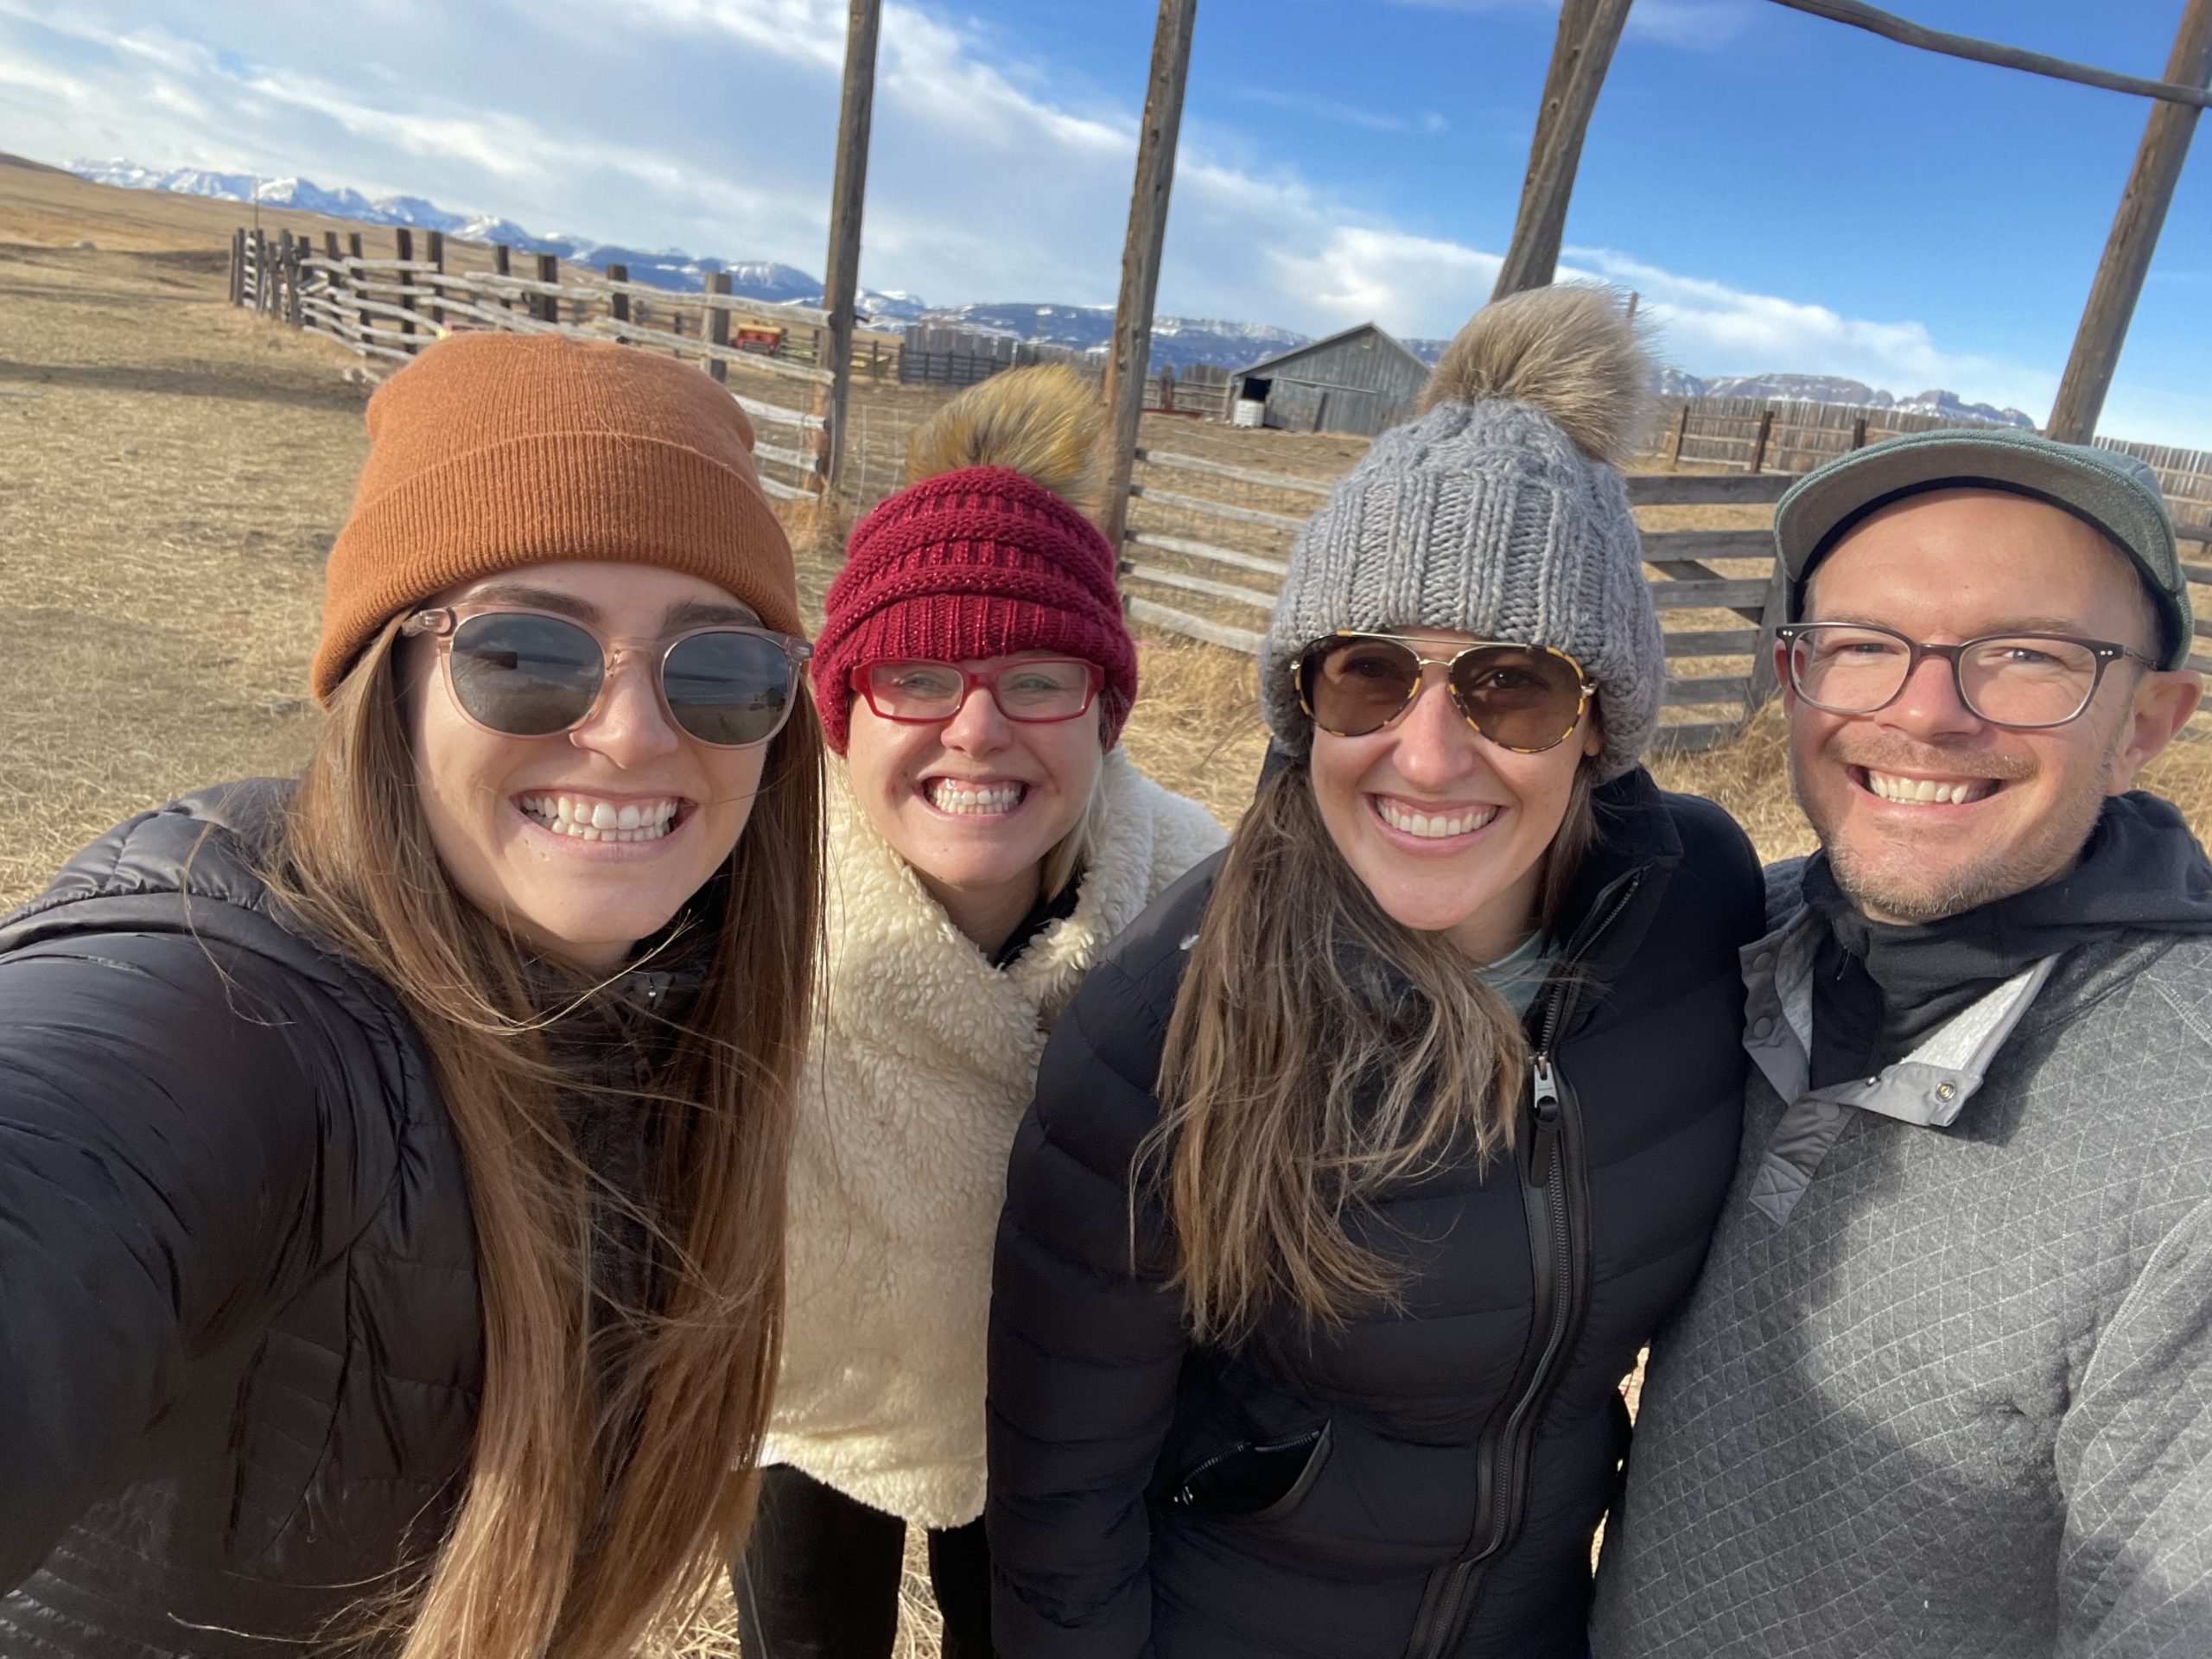 Caroline Sexton, Abbi Whittaker, Connie Anderson, and Thaison Kawal in Montana